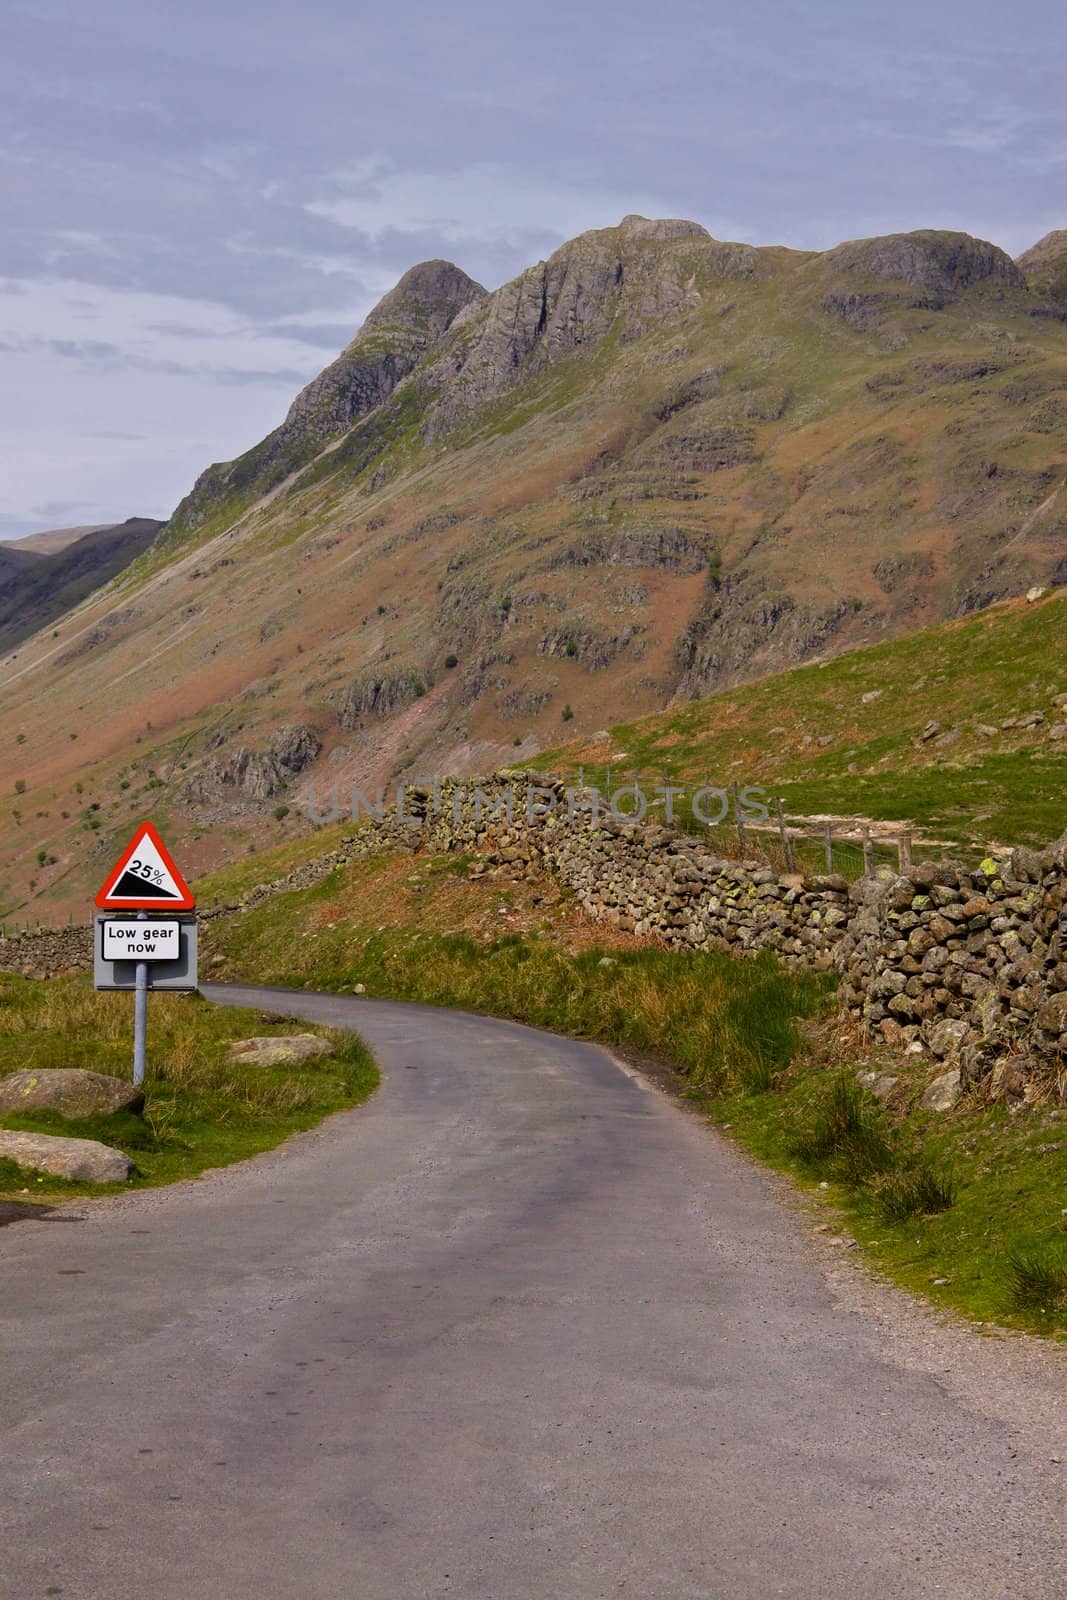 Steep road in Cumbria by Harvepino